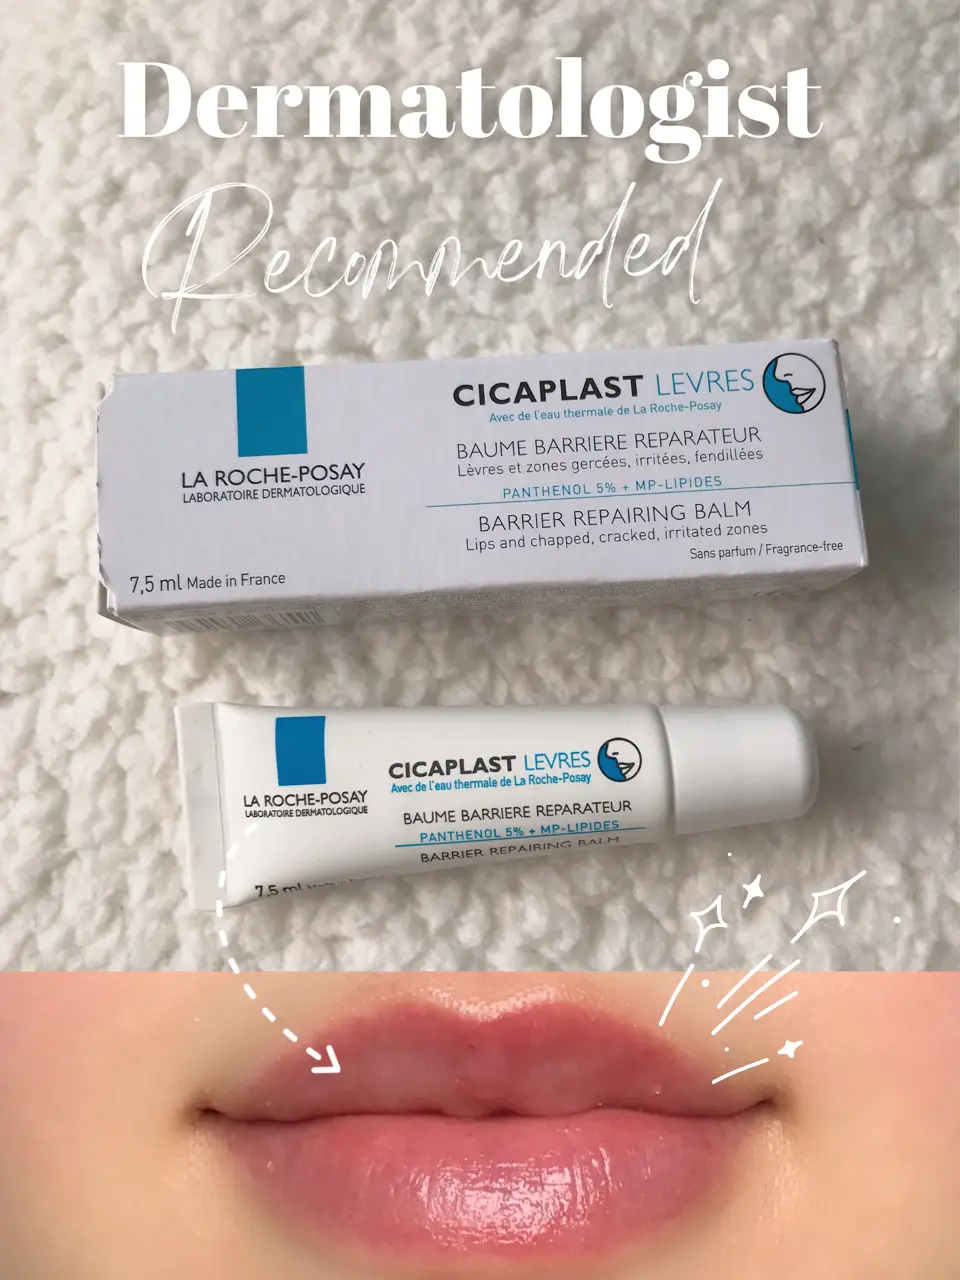 My dermatologist recommended this lip balm! 💋 | Gallery posted by xopeachy_keen Lemon8